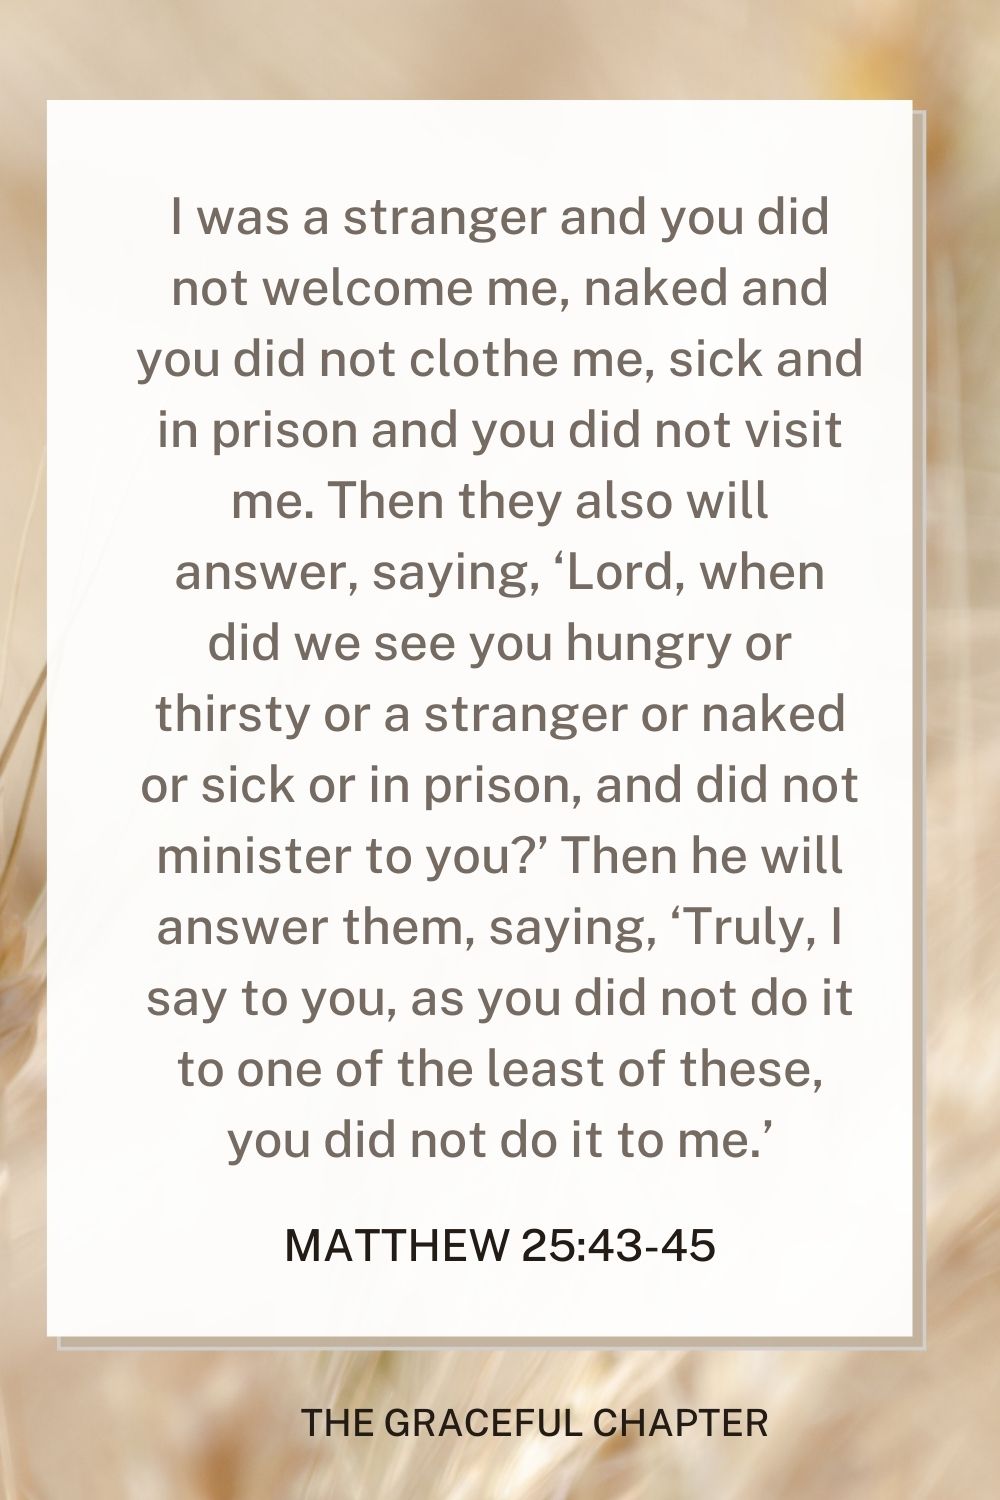 I was a stranger and you did not welcome me, naked and you did not clothe me, sick and in prison and you did not visit me. Then they also will answer, saying, ‘Lord, when did we see you hungry or thirsty or a stranger or naked or sick or in prison, and did not minister to you?’ Then he will answer them, saying, ‘Truly, I say to you, as you did not do it to one of the least of these, you did not do it to me.’ Matthew 25:43-45